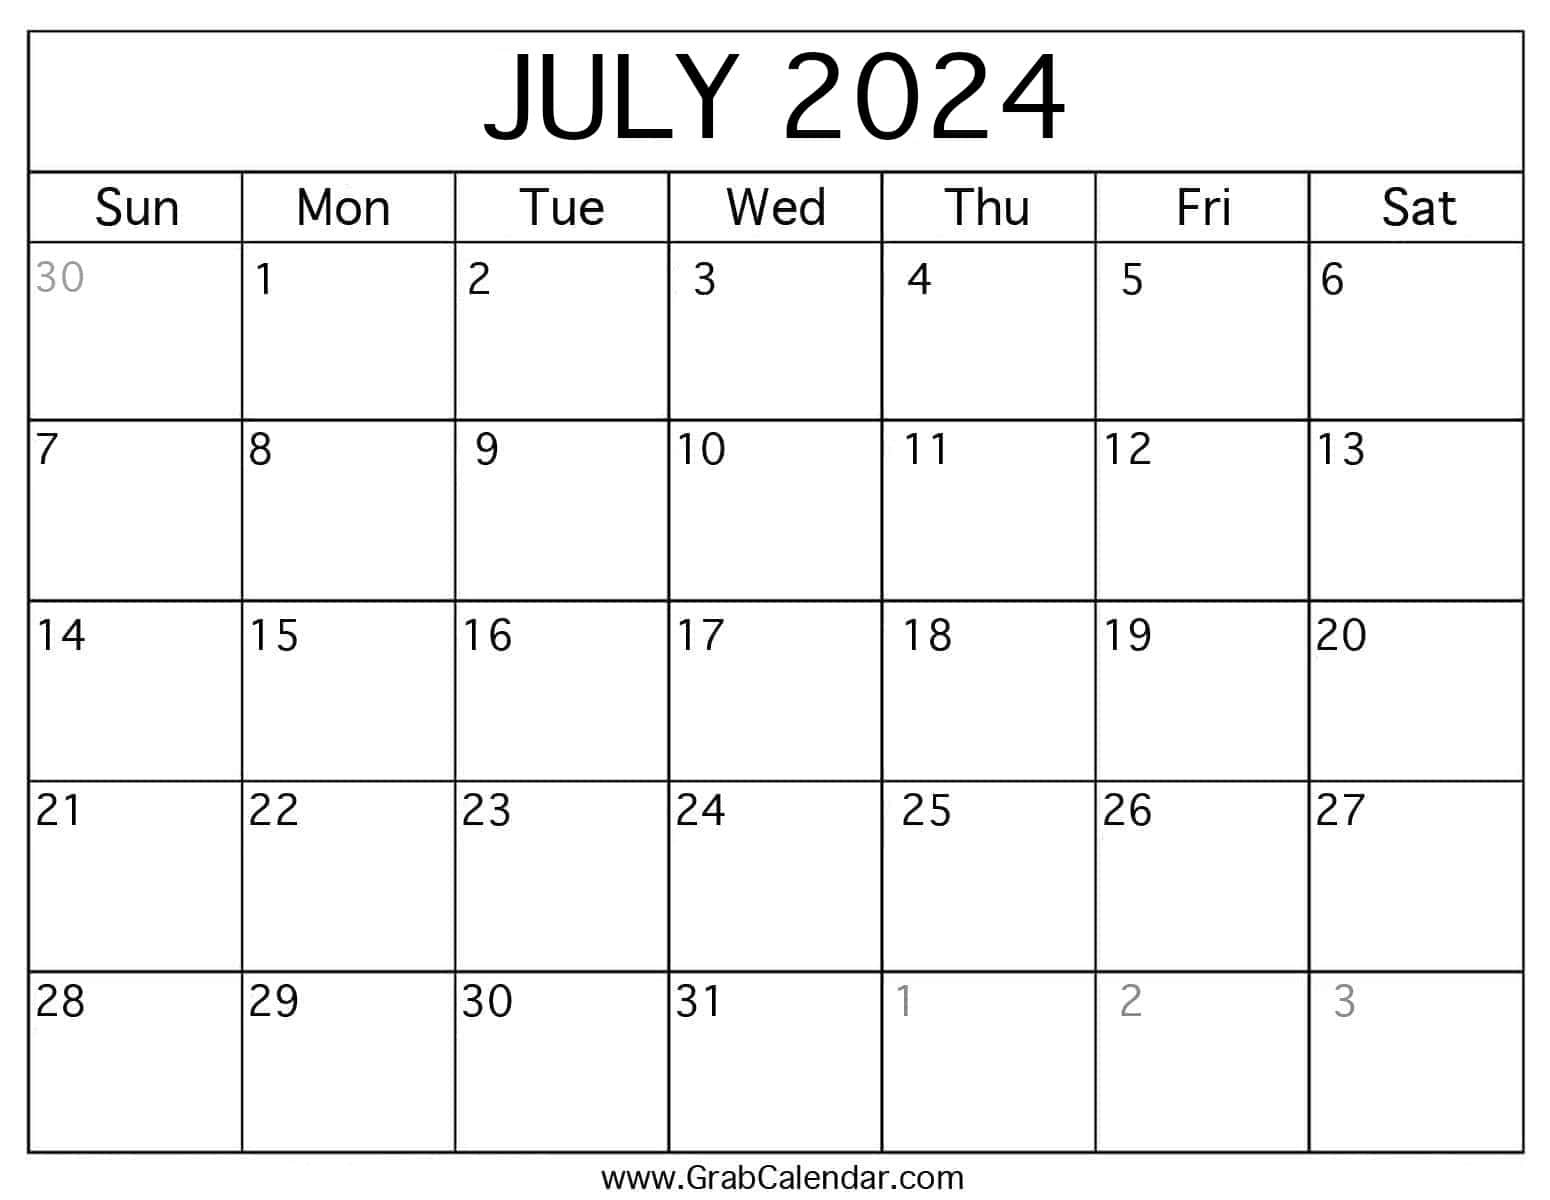 Printable July 2024 Calendar pertaining to Calendar Days in July 2024